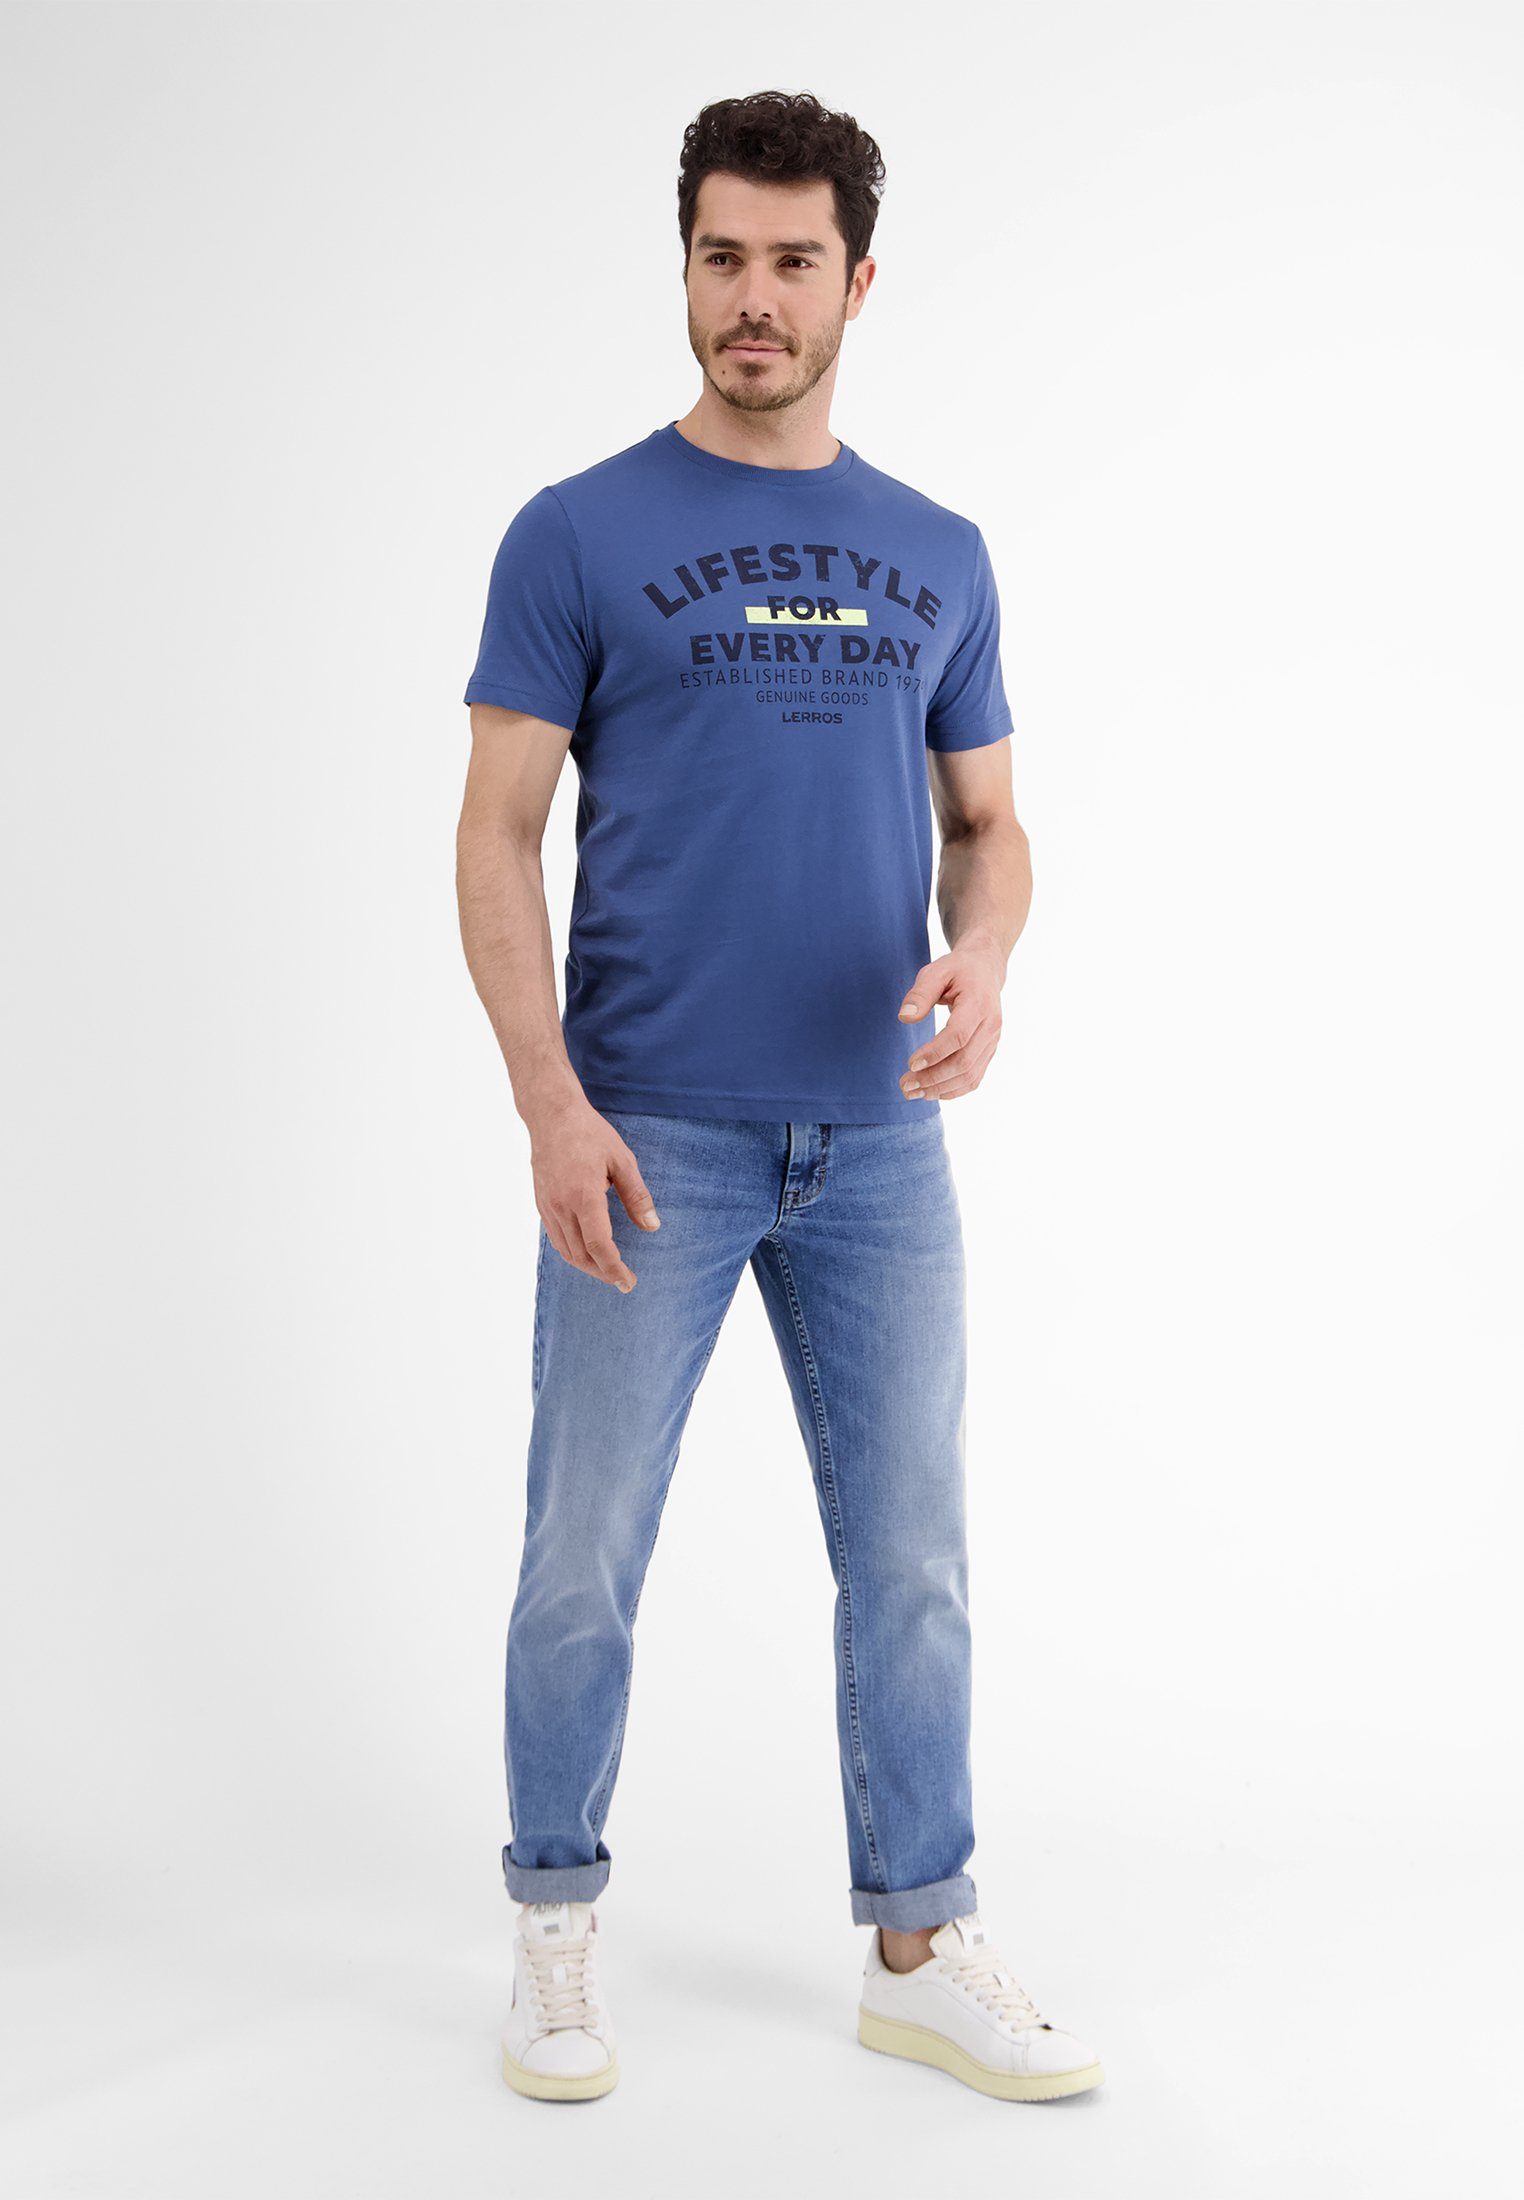 LERROS day* T-Shirt *Lifestyle LERROS every for T-Shirt BLUE